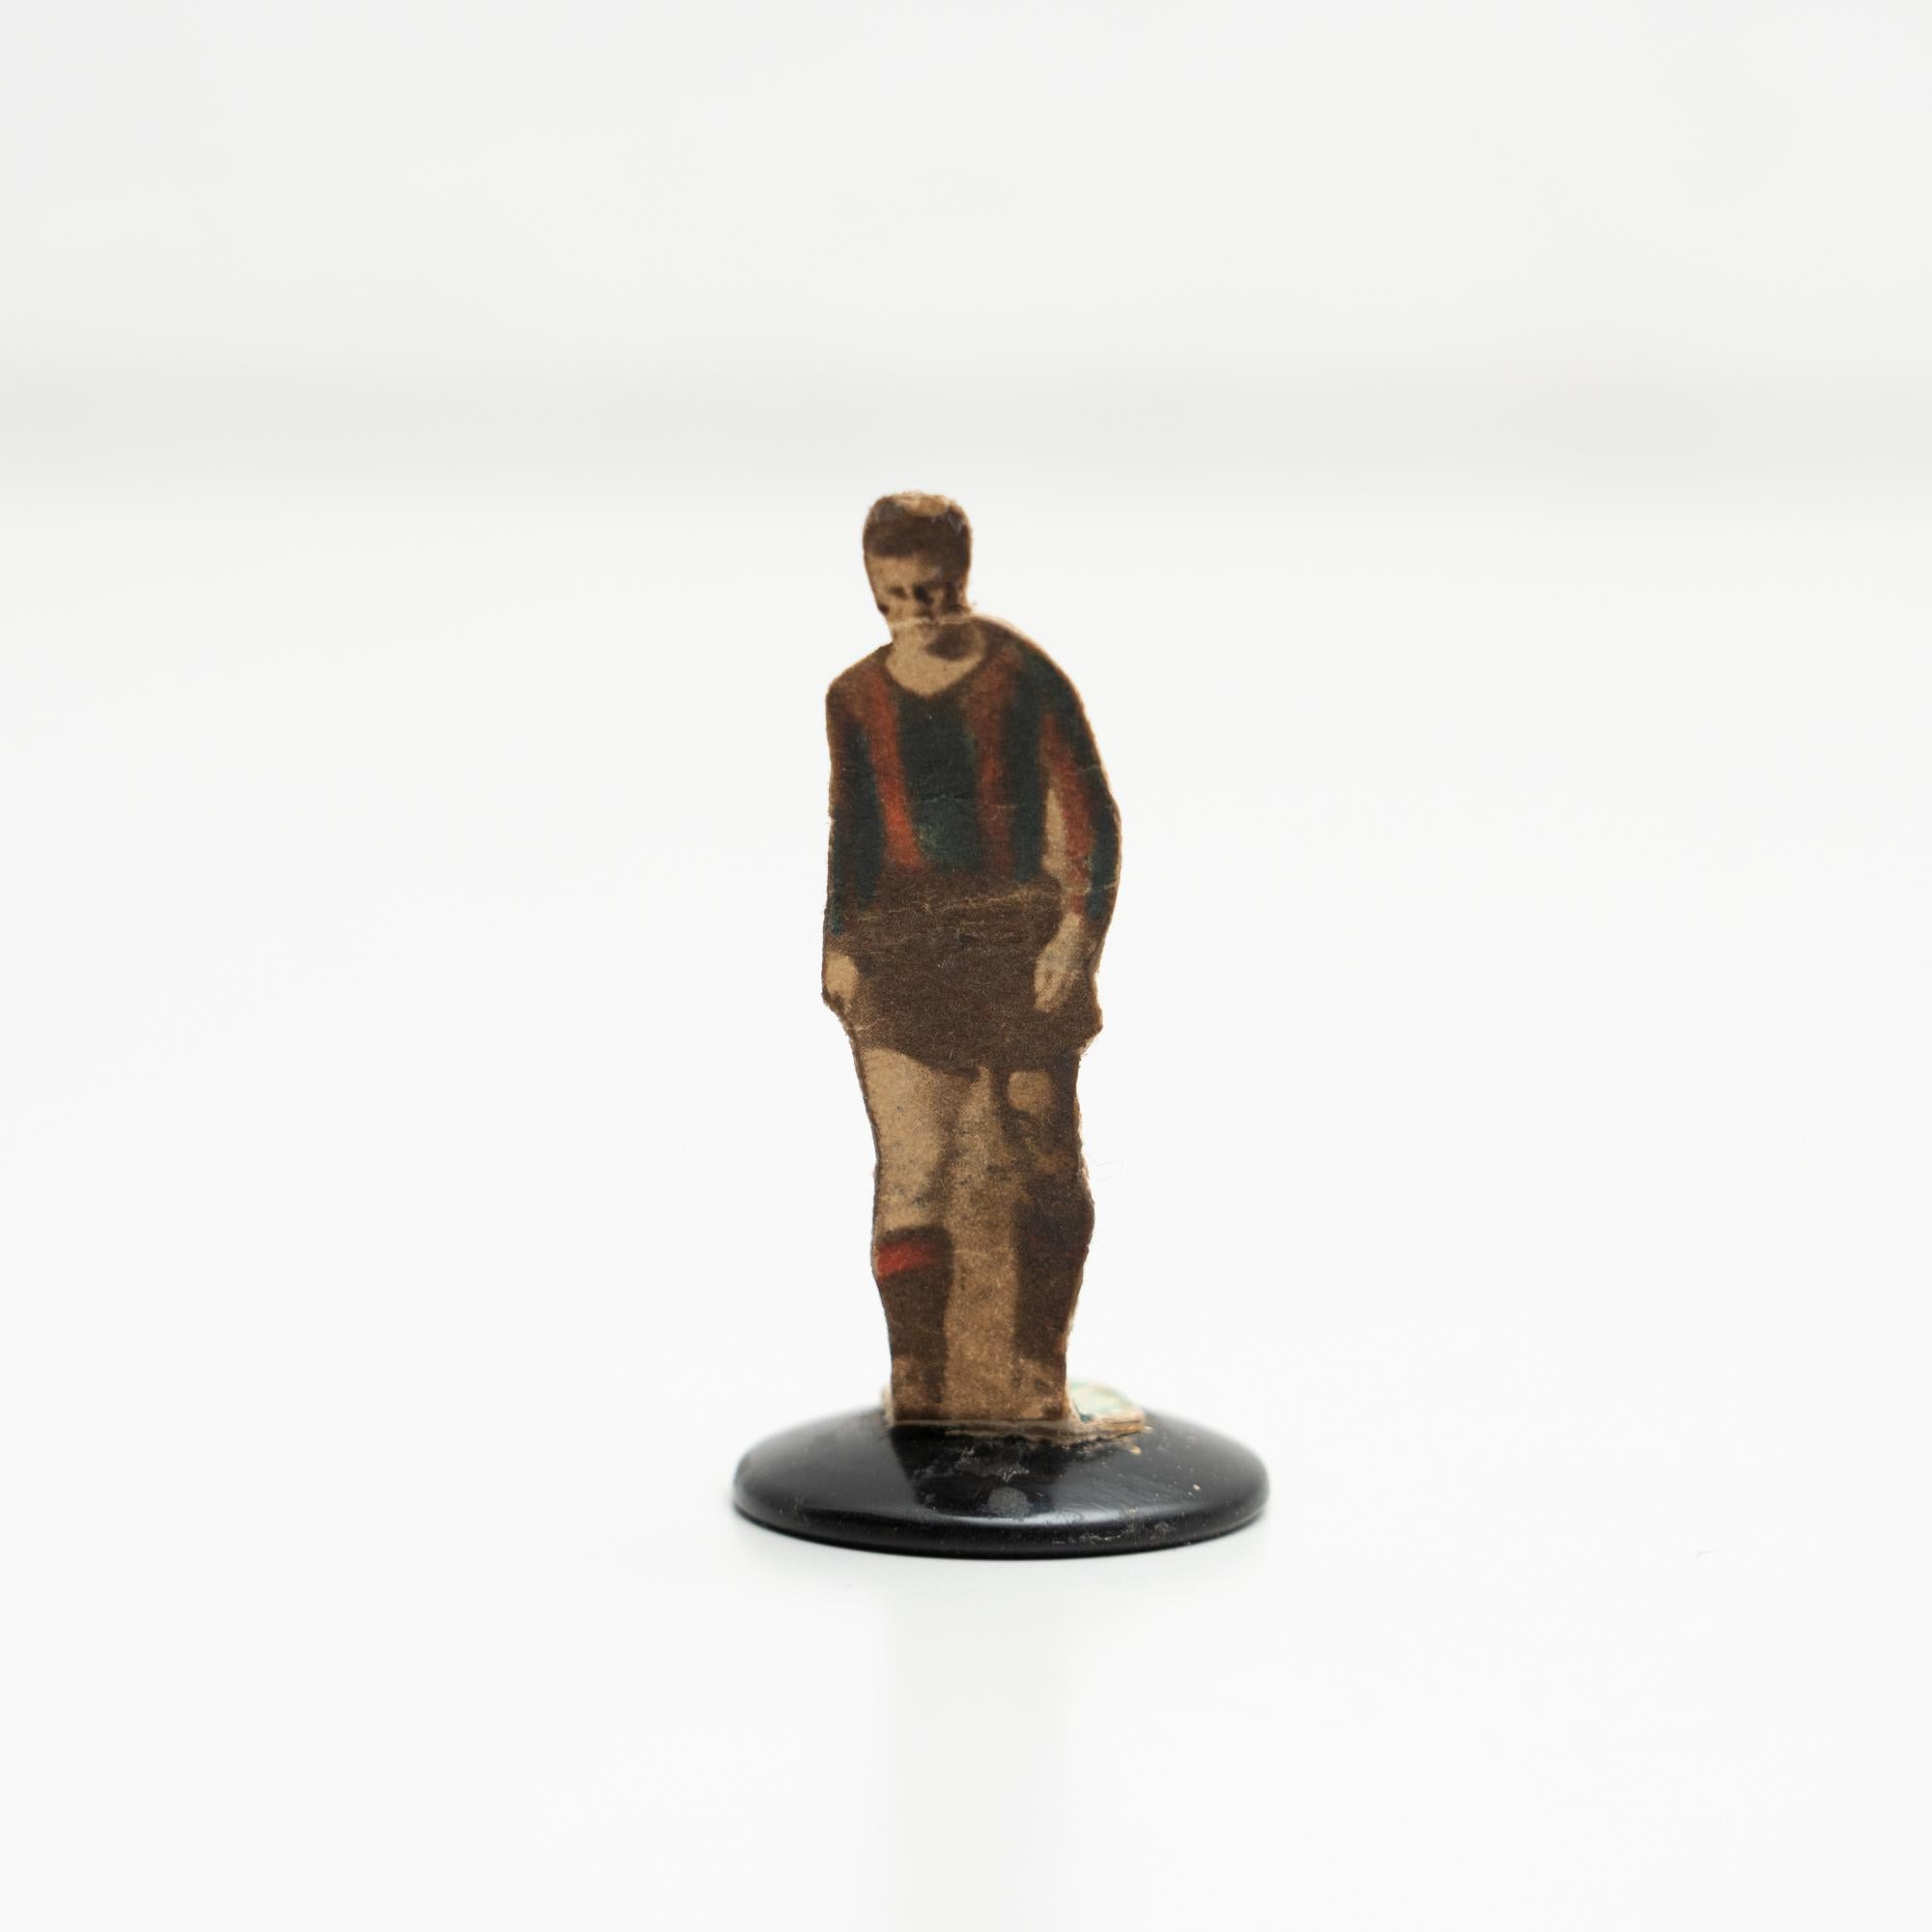 Table button soccer game player. Traditional figure used to play this classic button Spanish game. The figure is usually made by attaching a football player photograph, or sometimes a drawing, attached to a clothing button.

Manufactured in Spain,